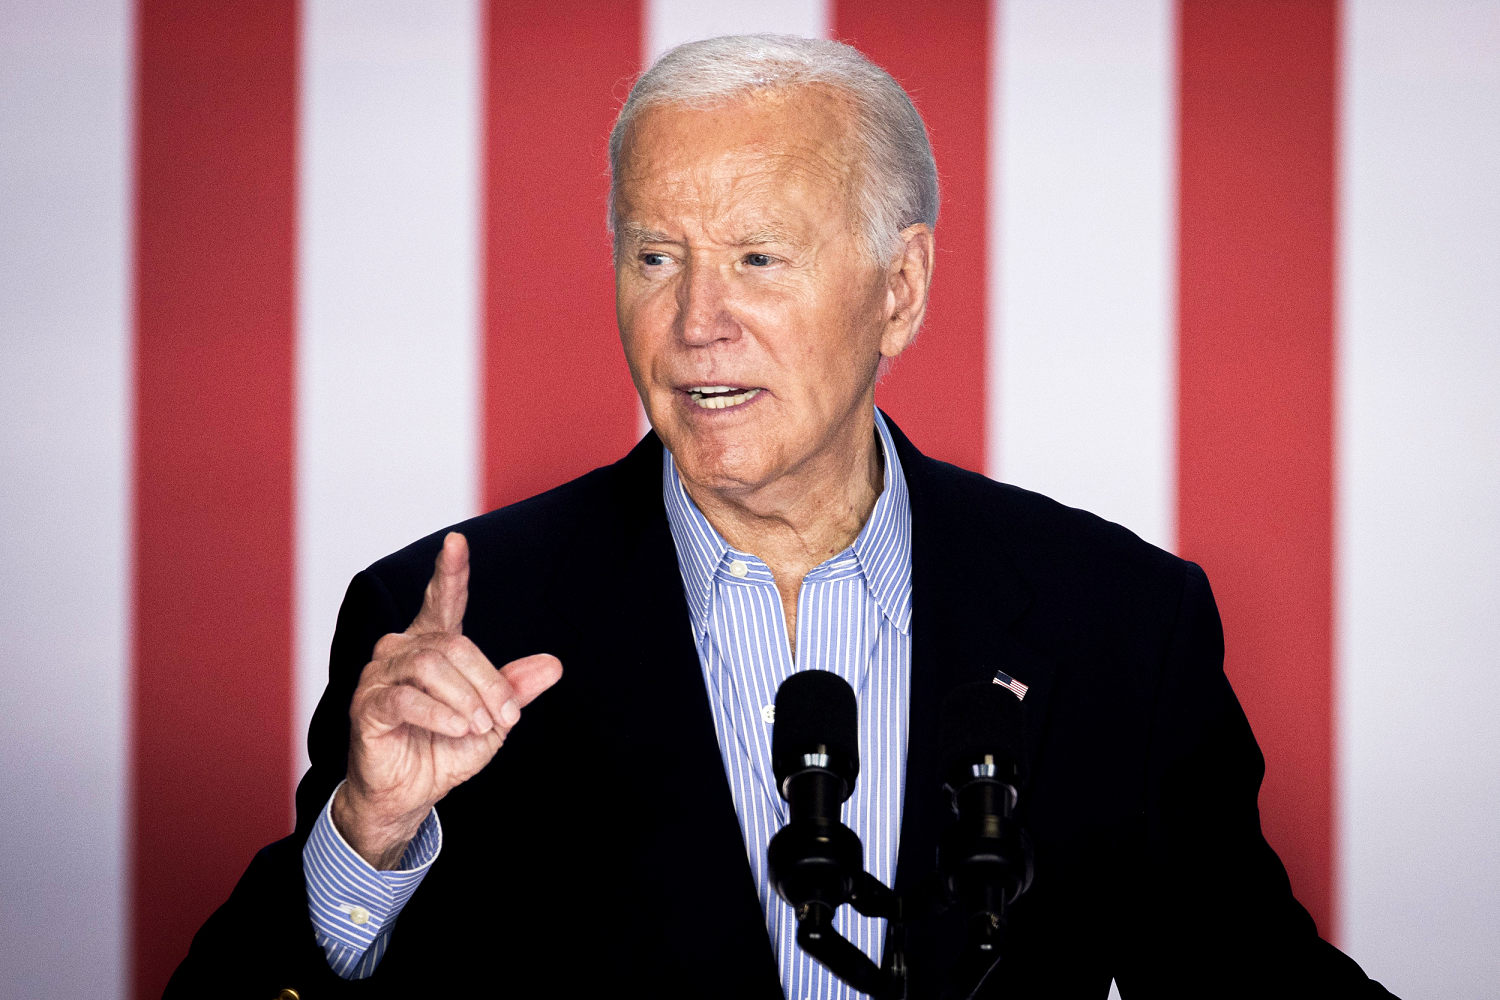 ‘We’re doomed’: Lawmakers worry Biden’s interview won’t save his campaign